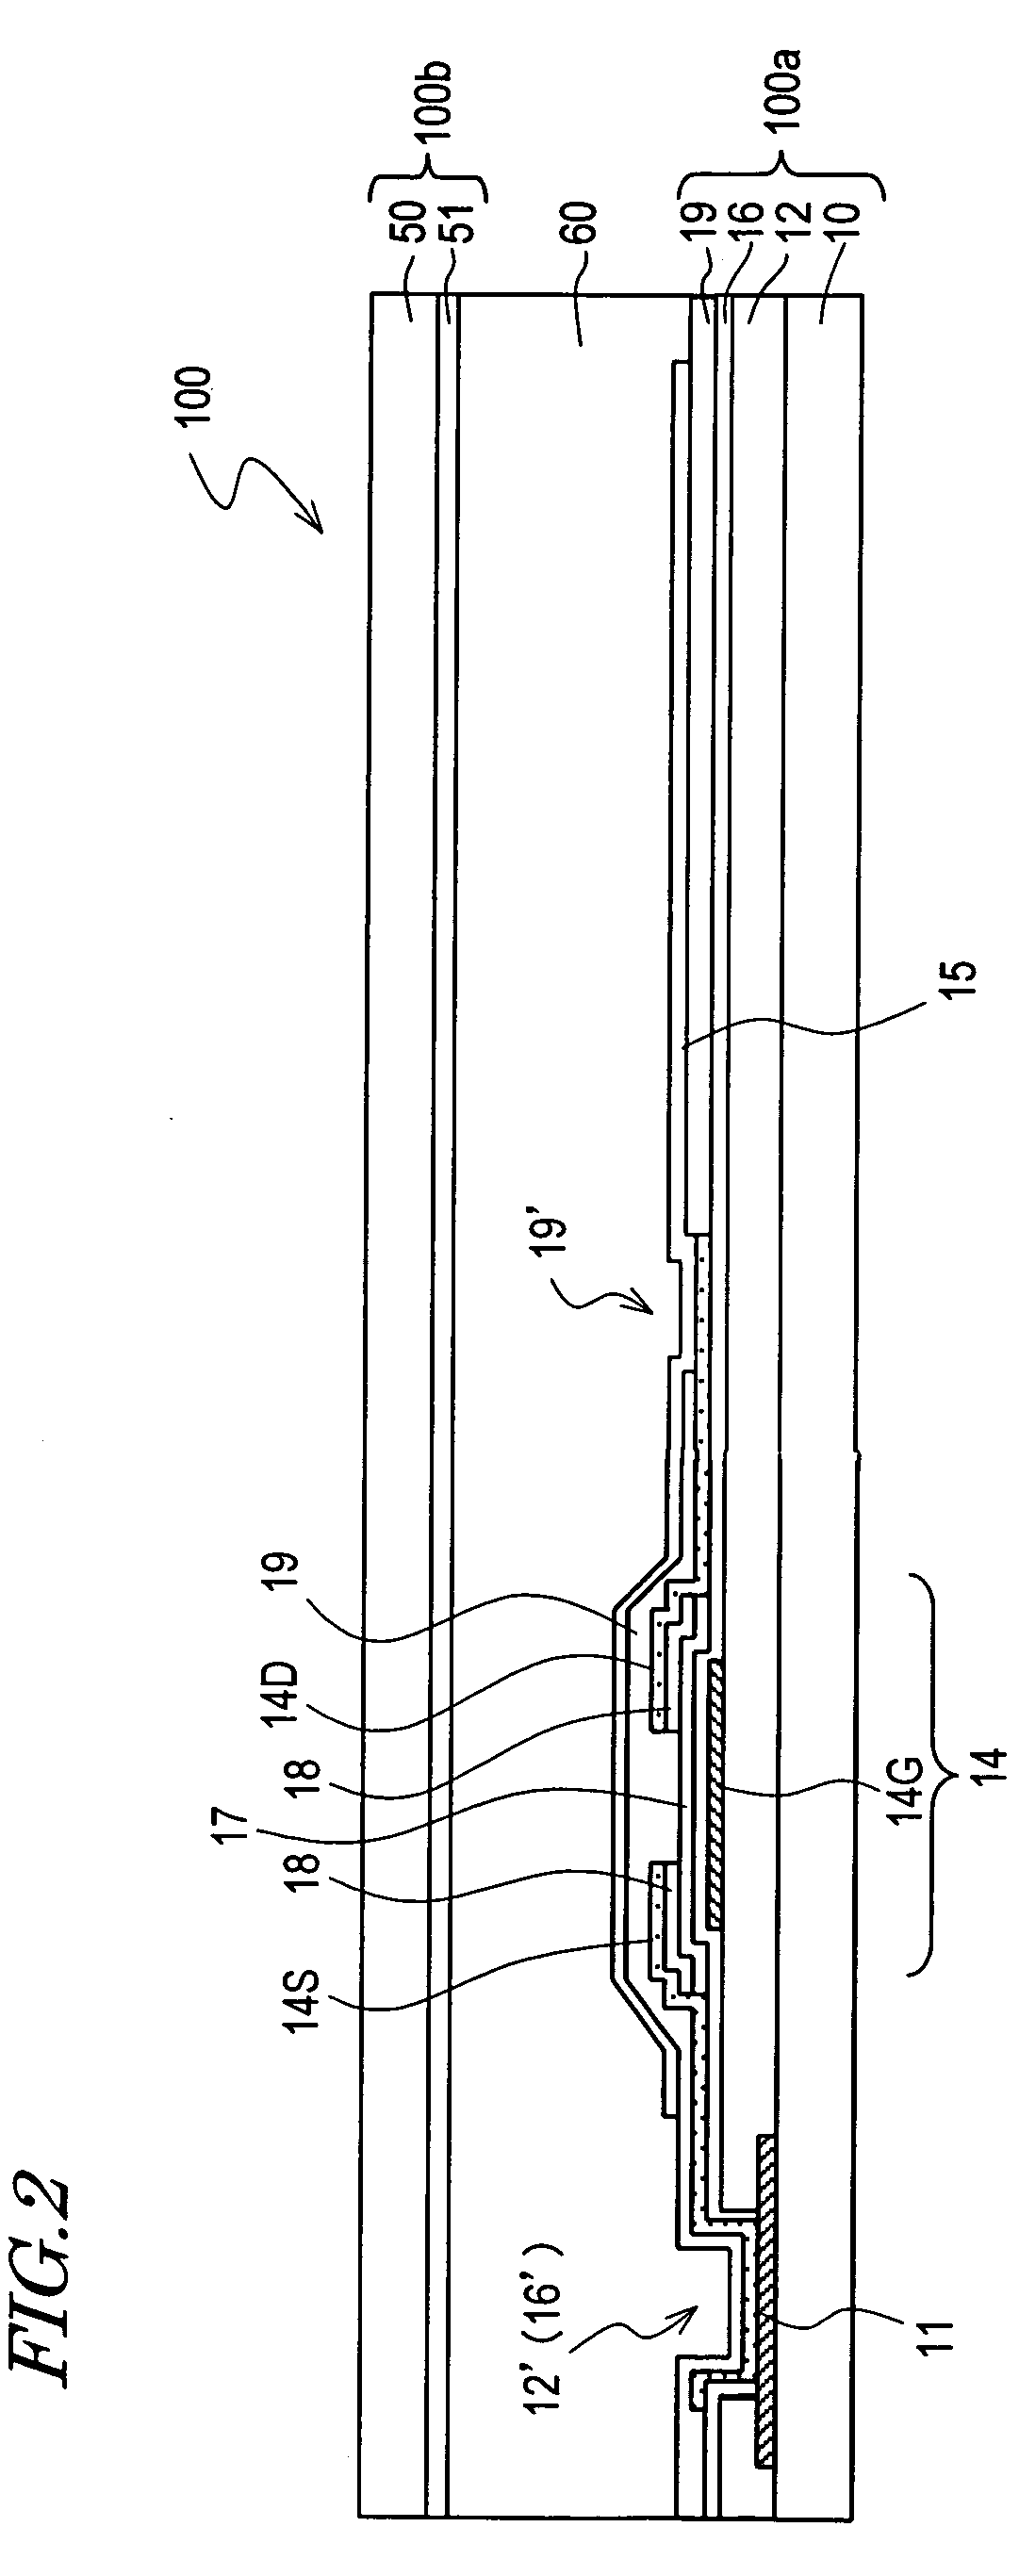 Active-matrix substrate and display device including the substrate wherein a bottom-gate TFT has data lines formed below the gate lines